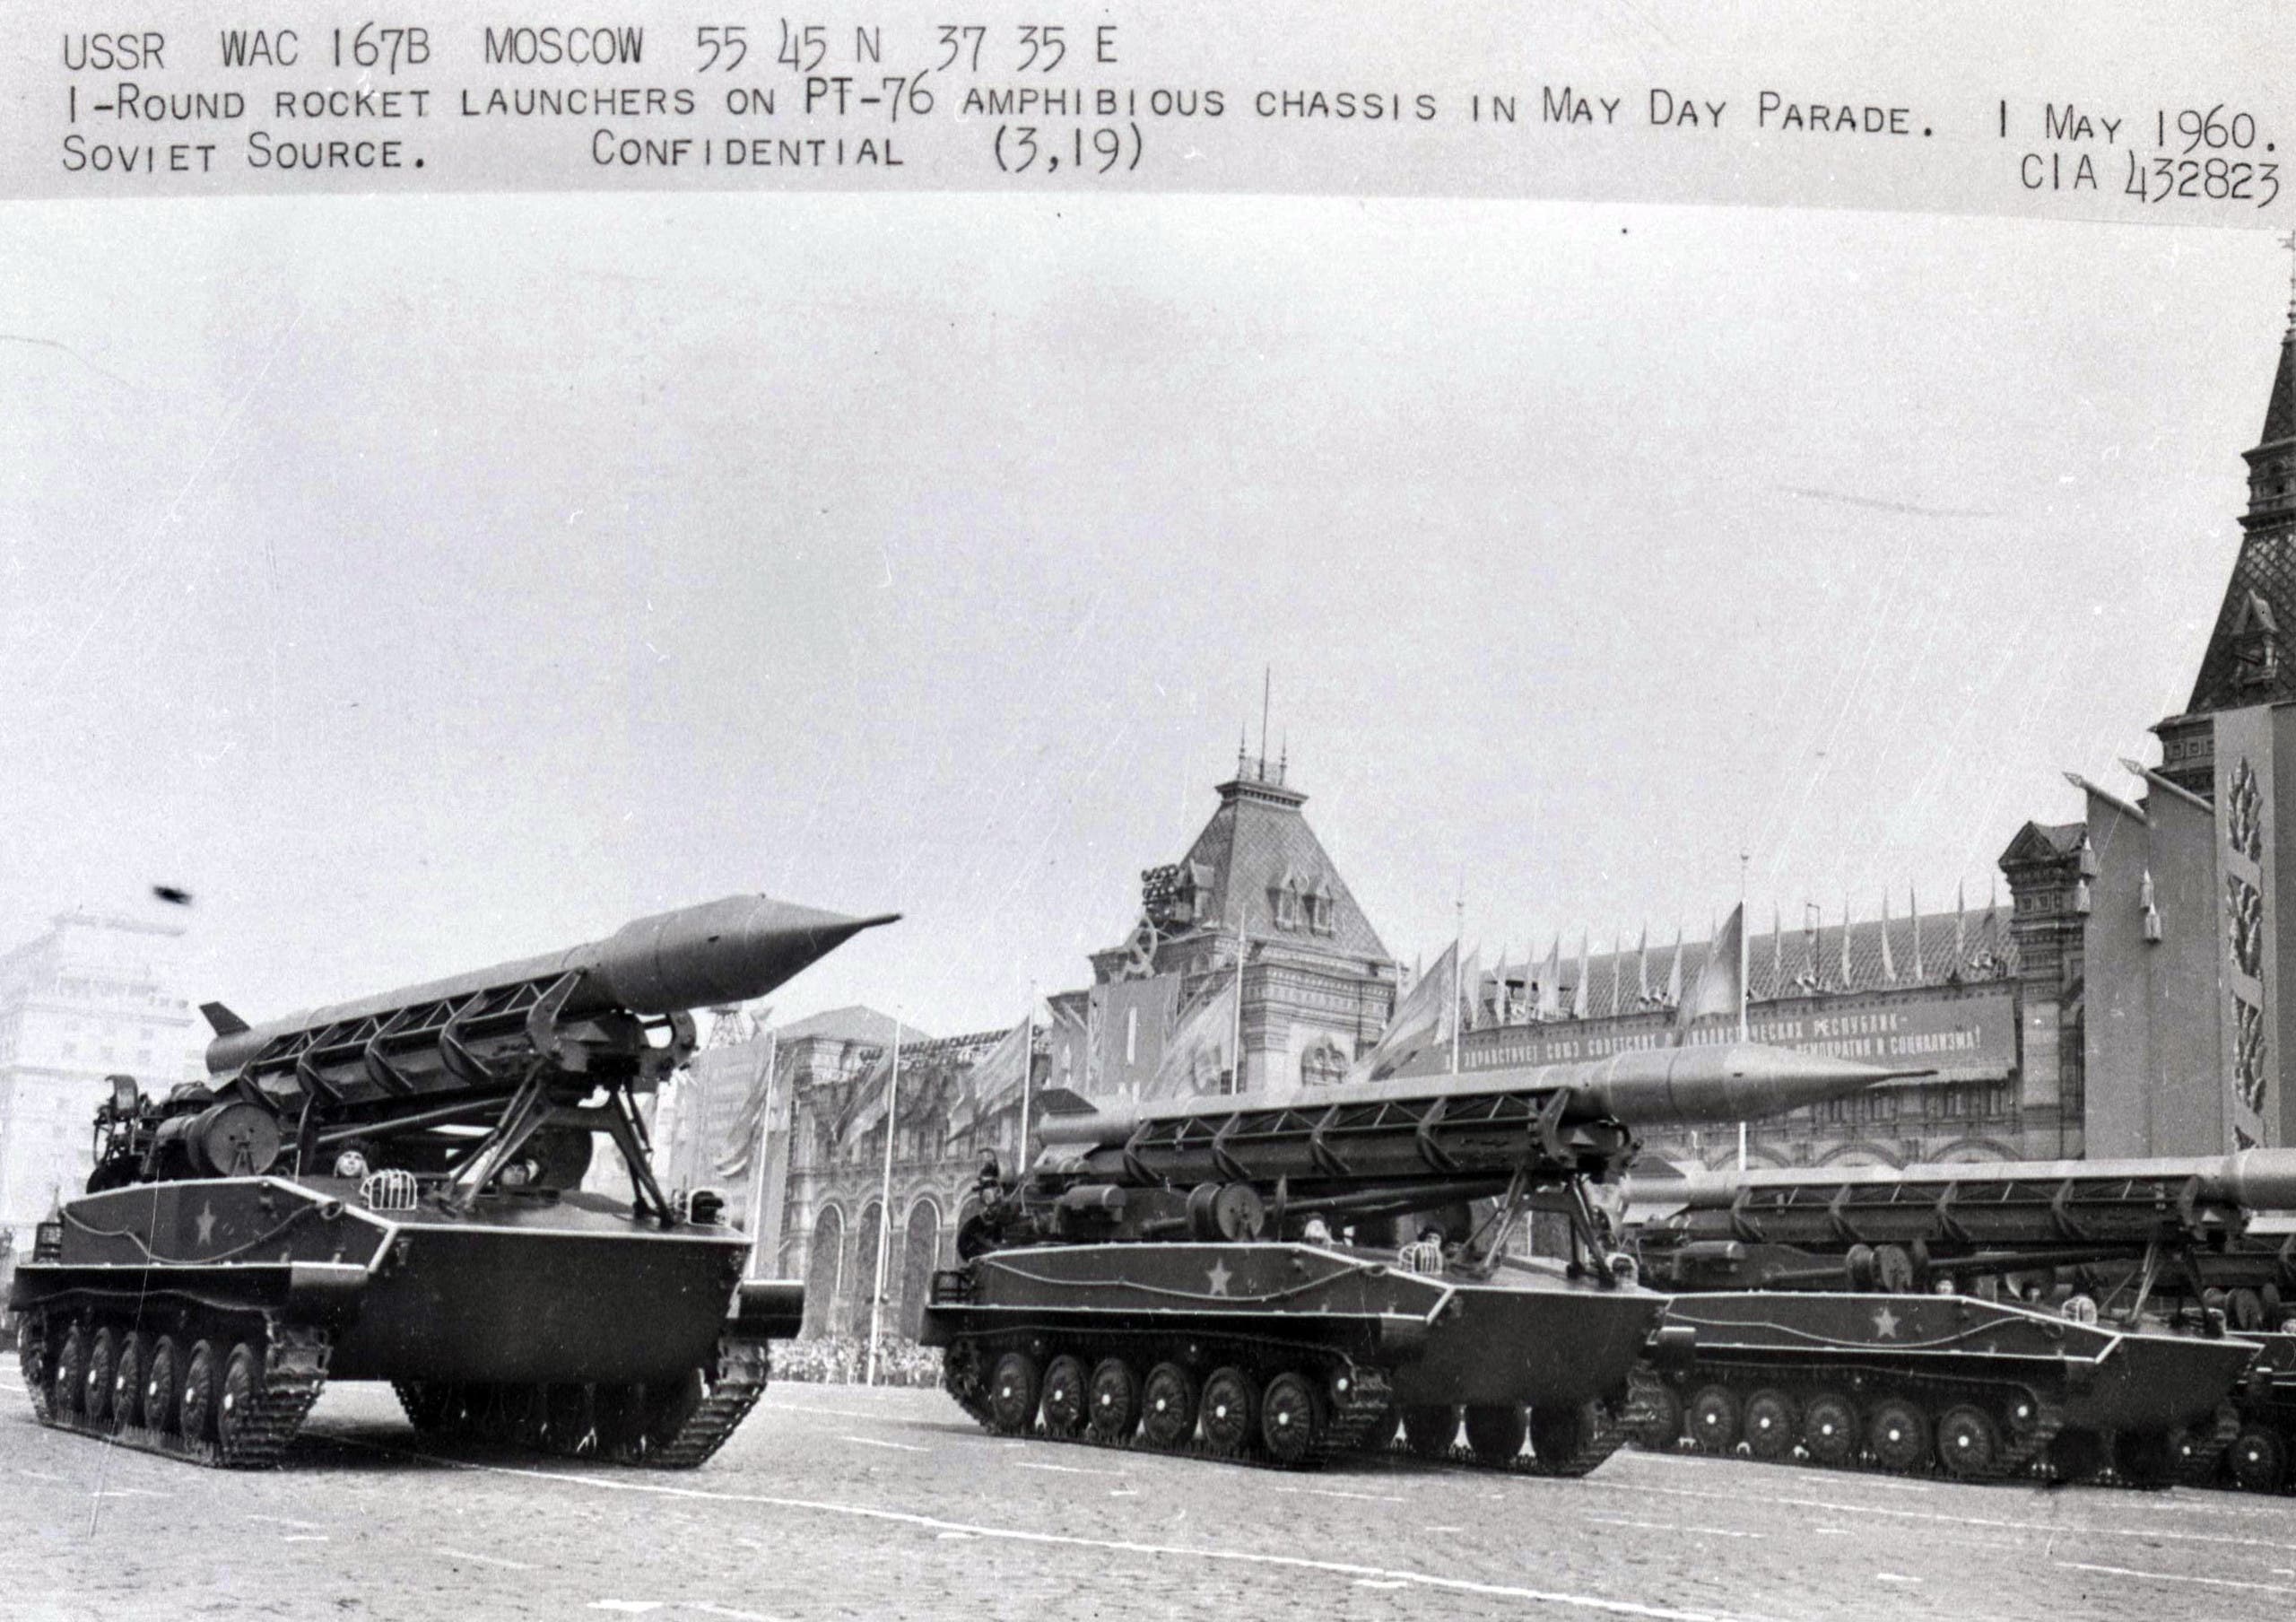 A photograph of a number of Soviet missiles in the early 1960s